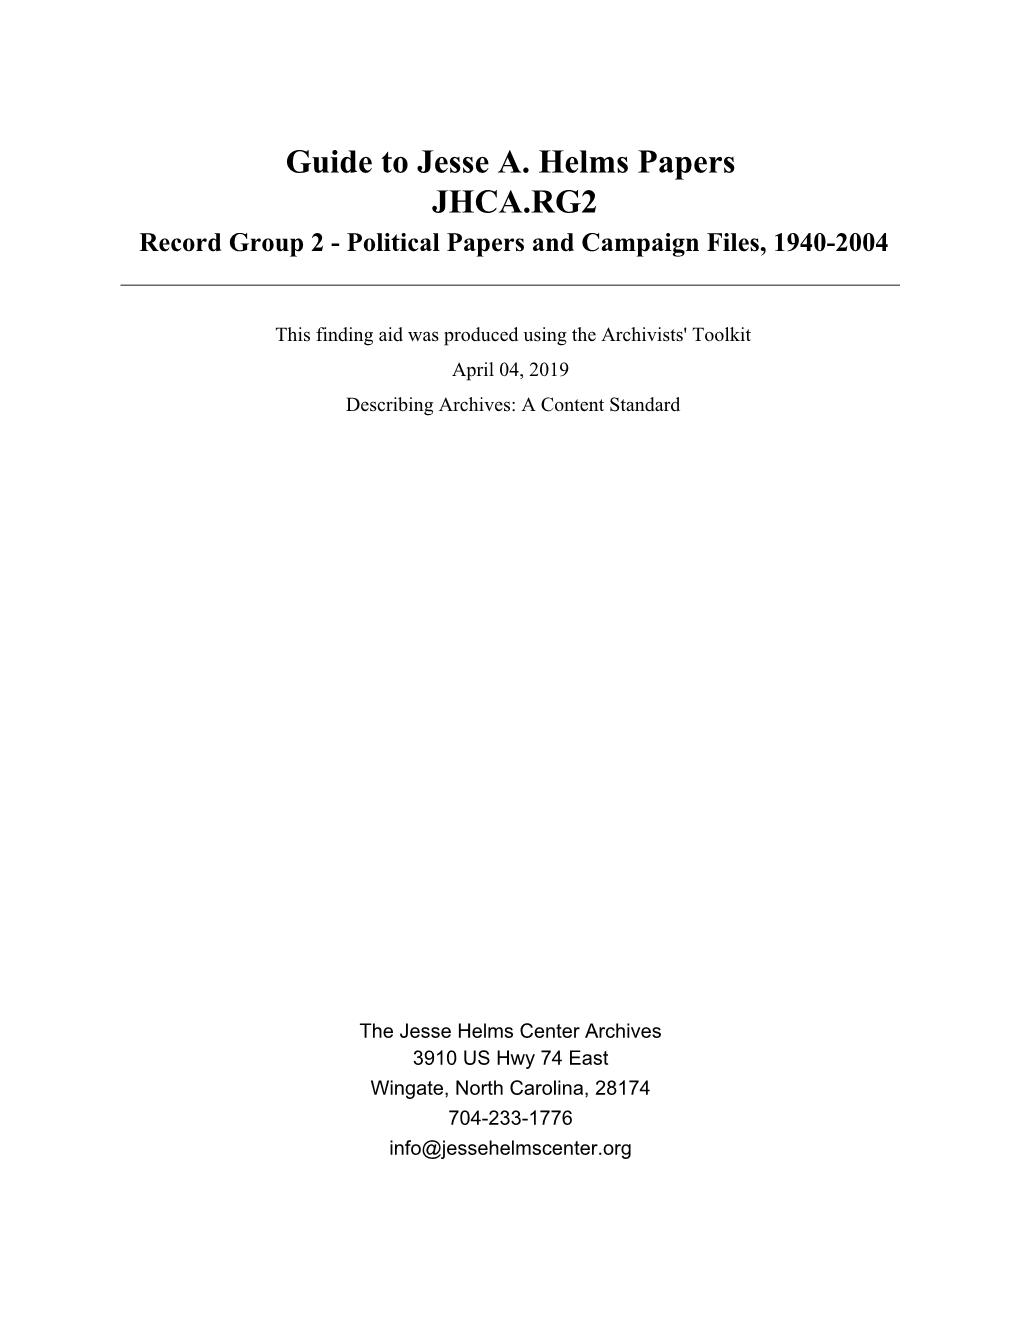 Guide to Jesse A. Helms Papers JHCA.RG2 Record Group 2 - Political Papers and Campaign Files, 1940-2004